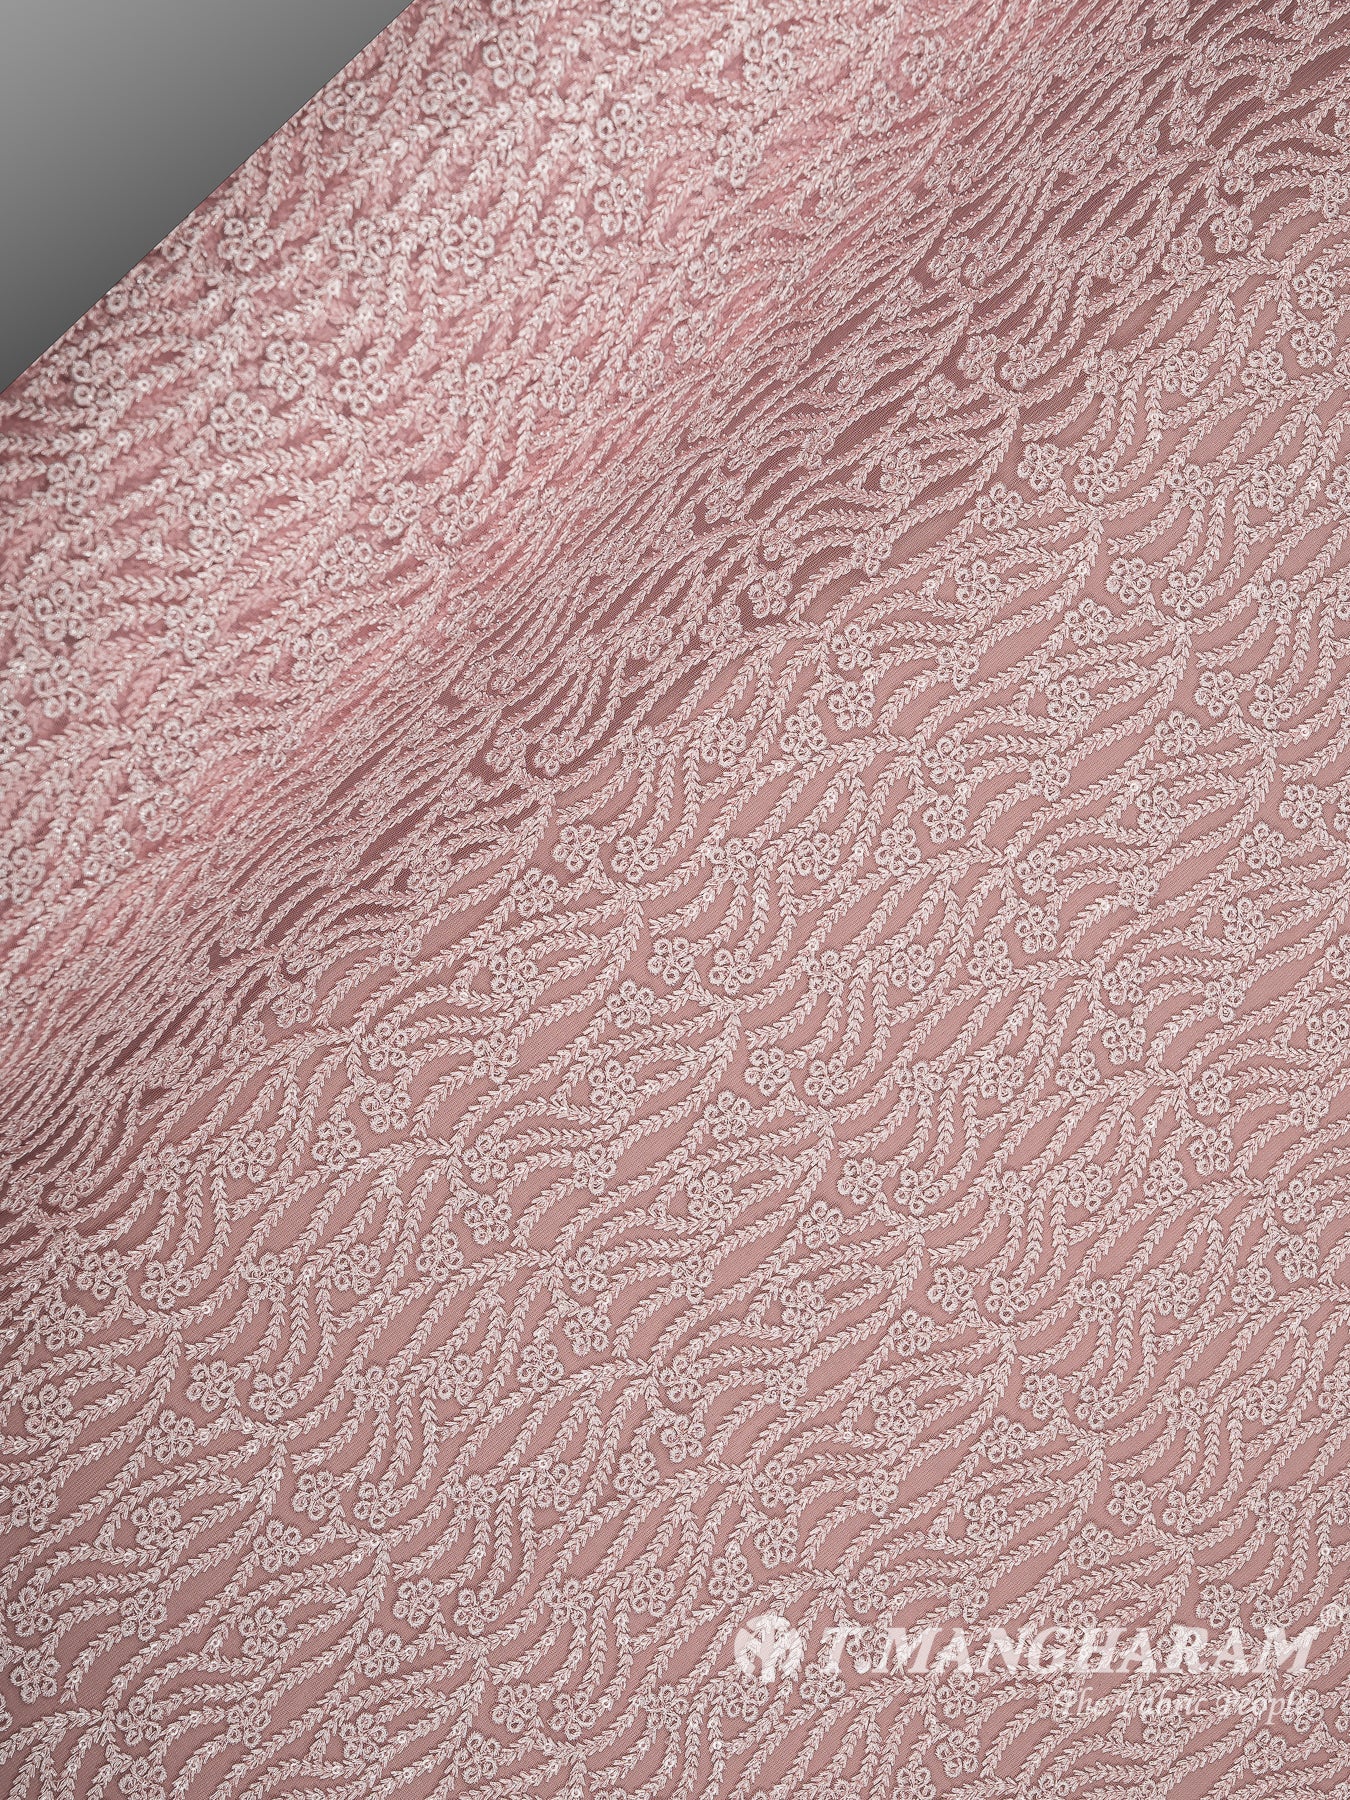 Peach Net Embroidery Fabric - EC8431 view-2